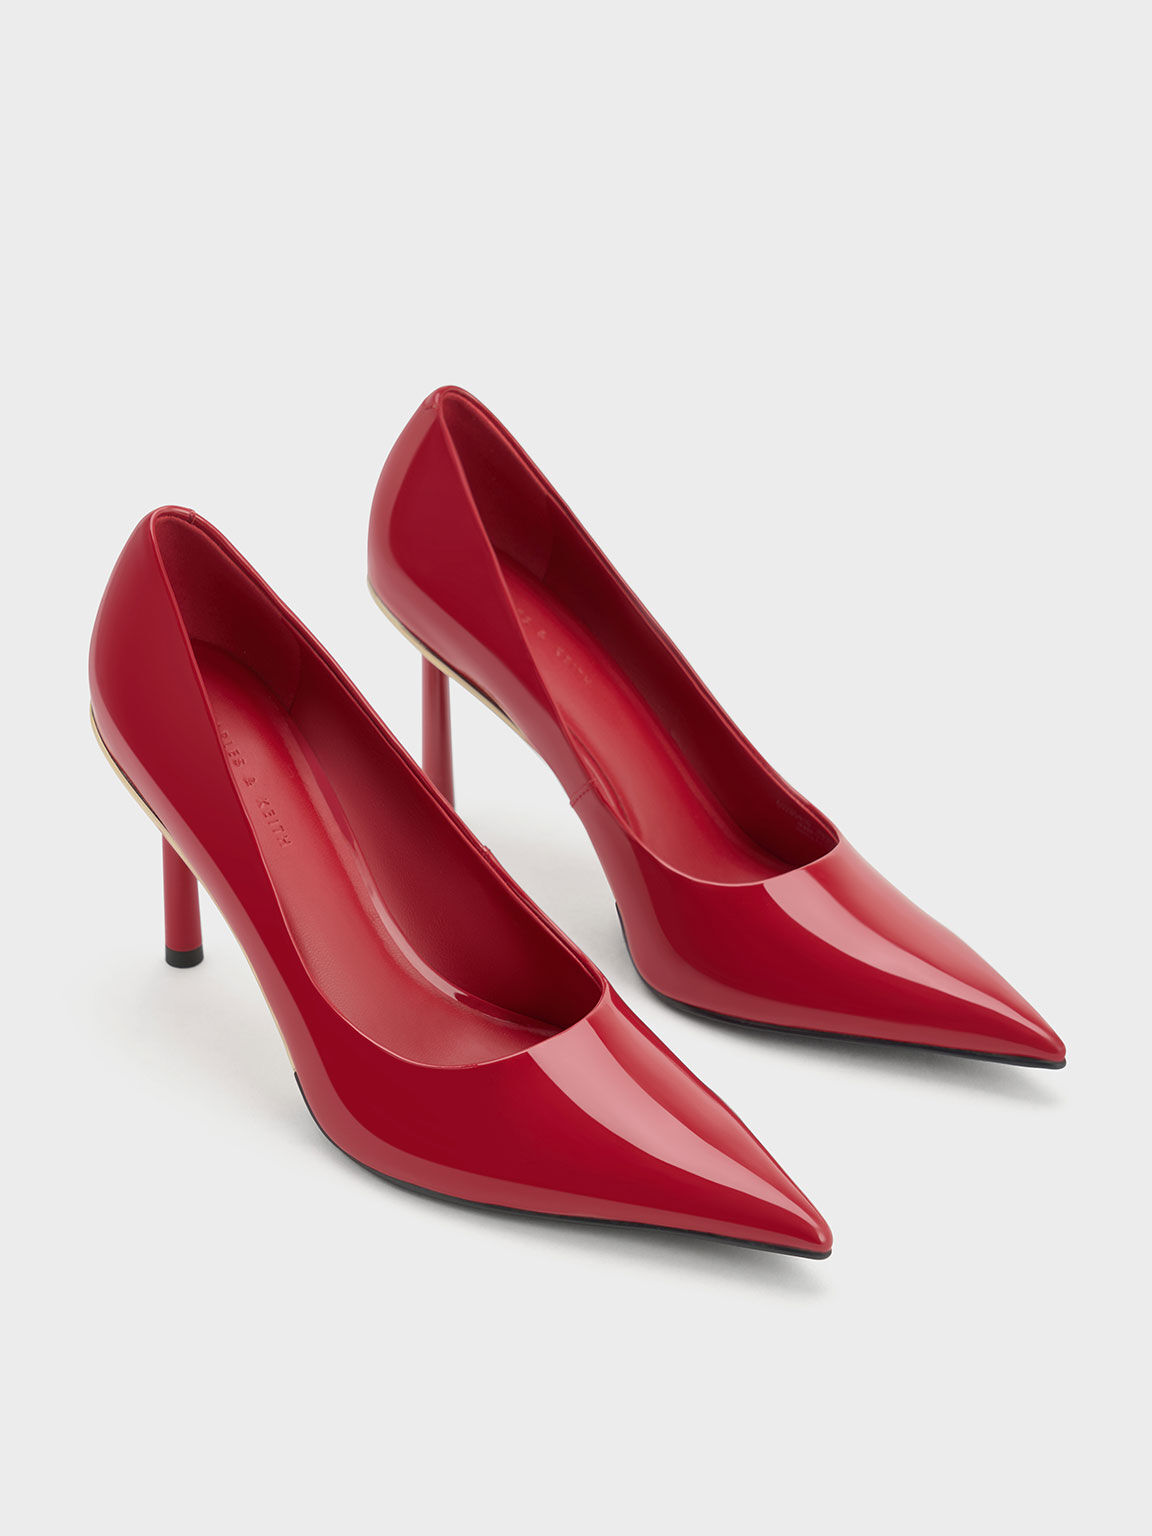 Red Heeled Sandals For Women Online – Buy Red Heeled Sandals Online in India